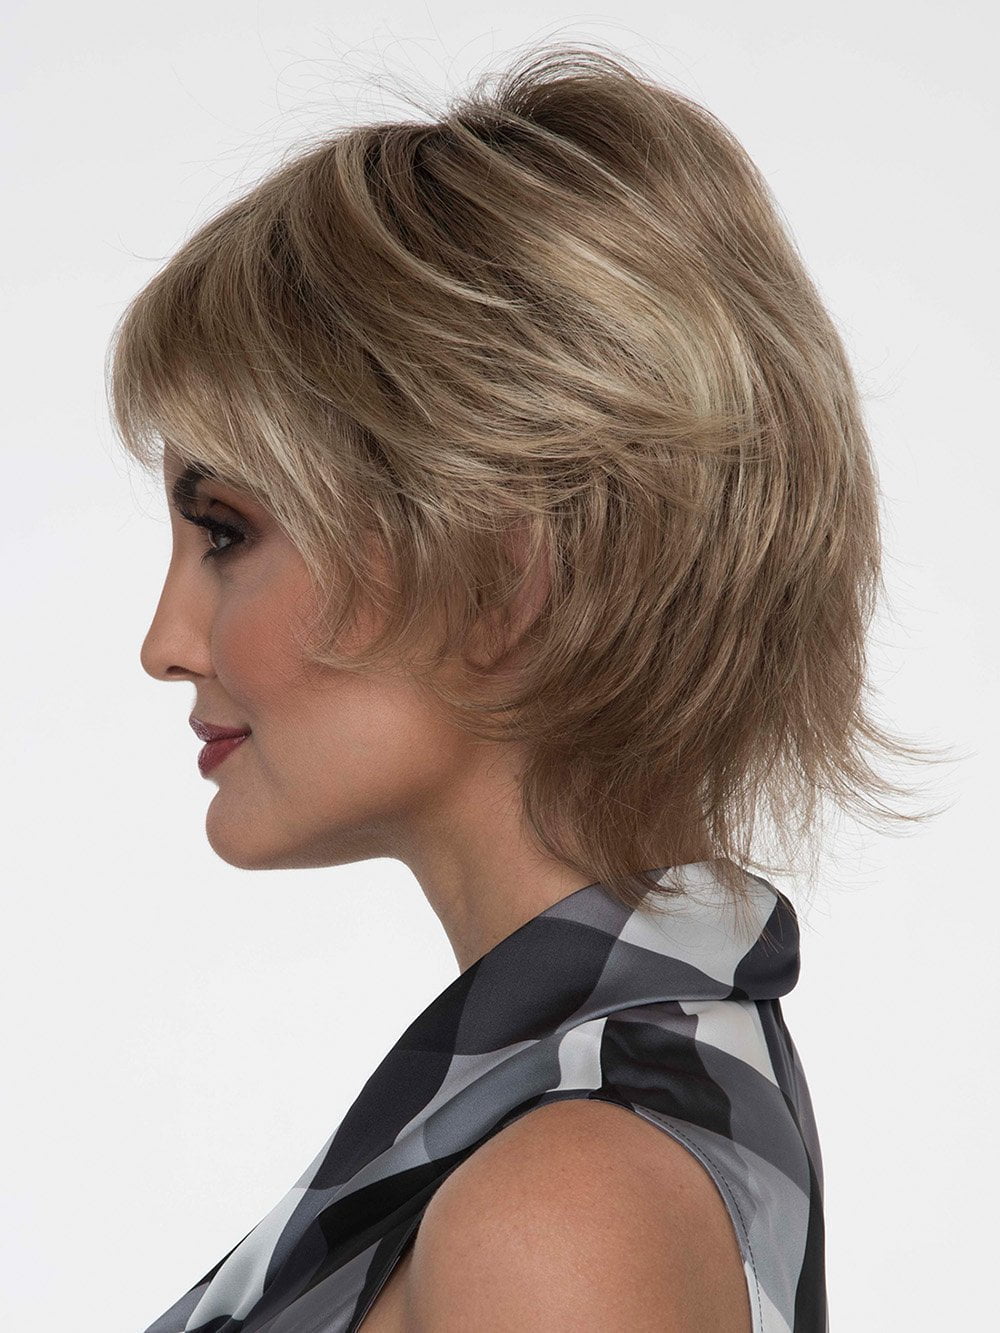 Short and shaggy is perfect for the girl on the go